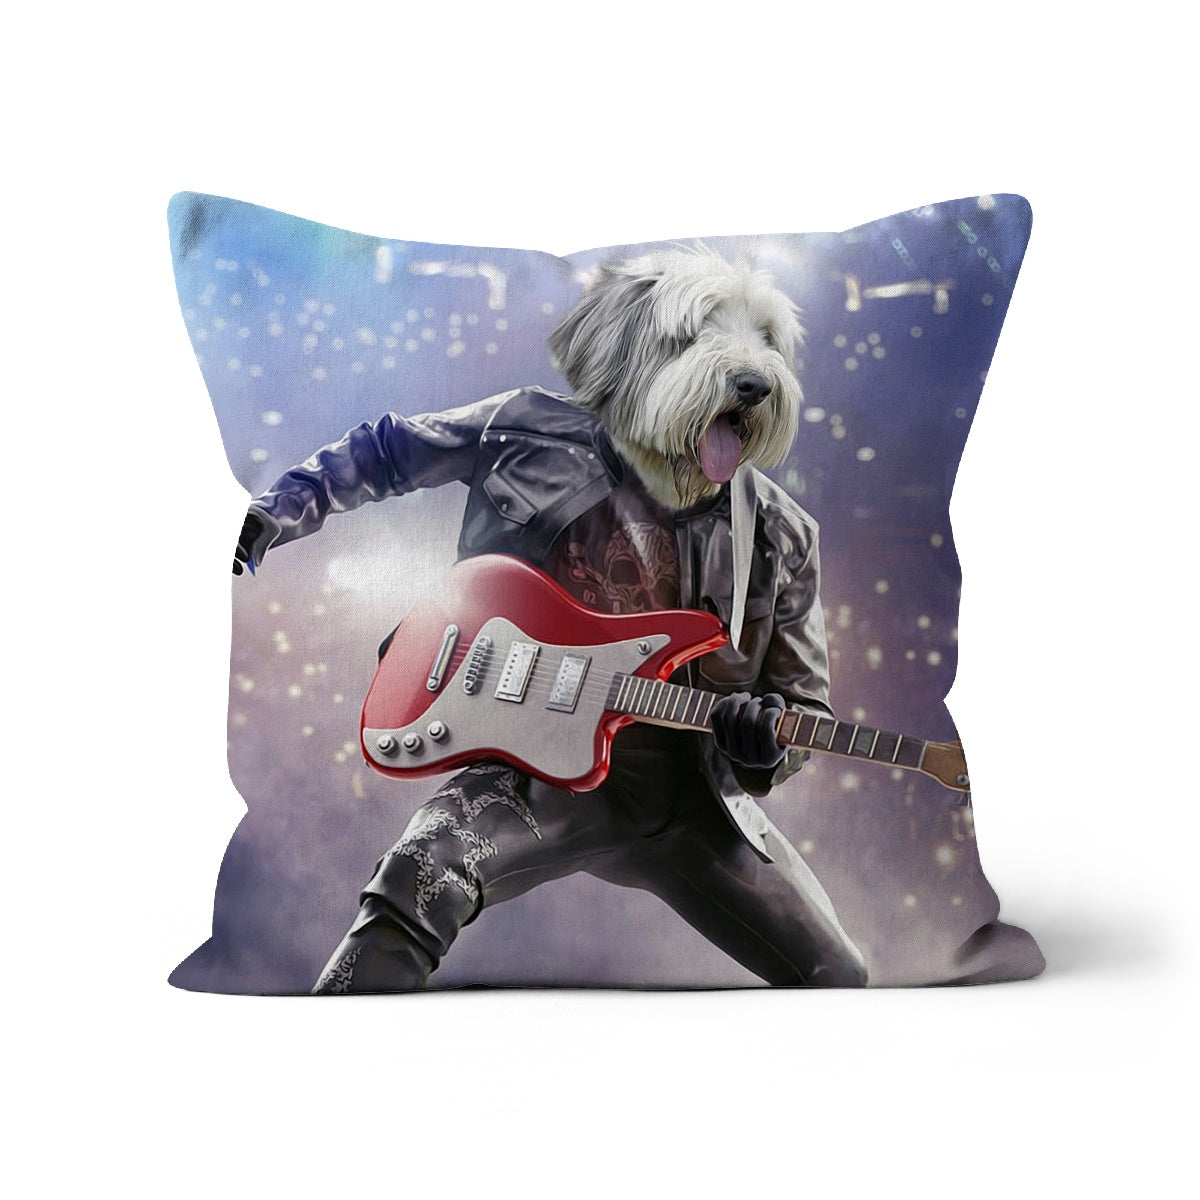 The Rock Star: Custom Pet Pillow, Paw & Glory,paw and glory, custom pet portraits funny dog in uniform portrait dog head painting personalized pet canvas art get a painting of your dog regal paw